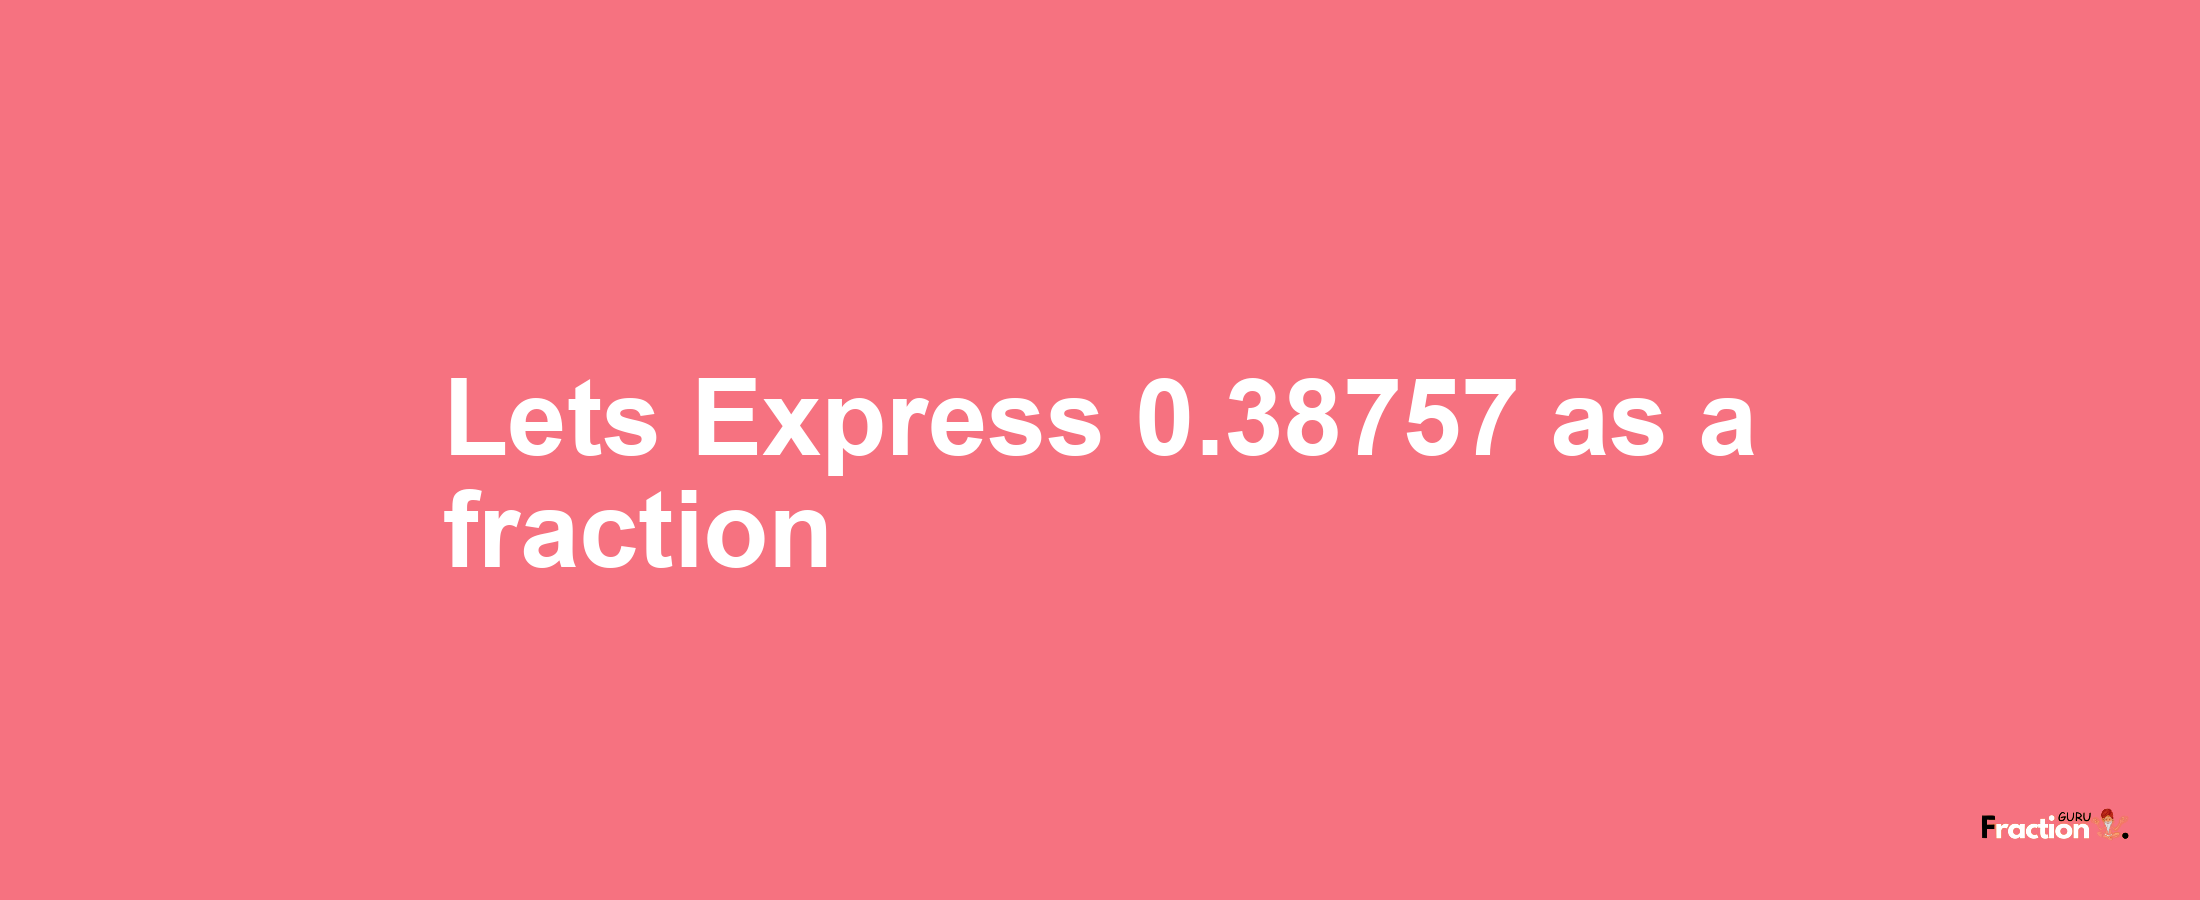 Lets Express 0.38757 as afraction